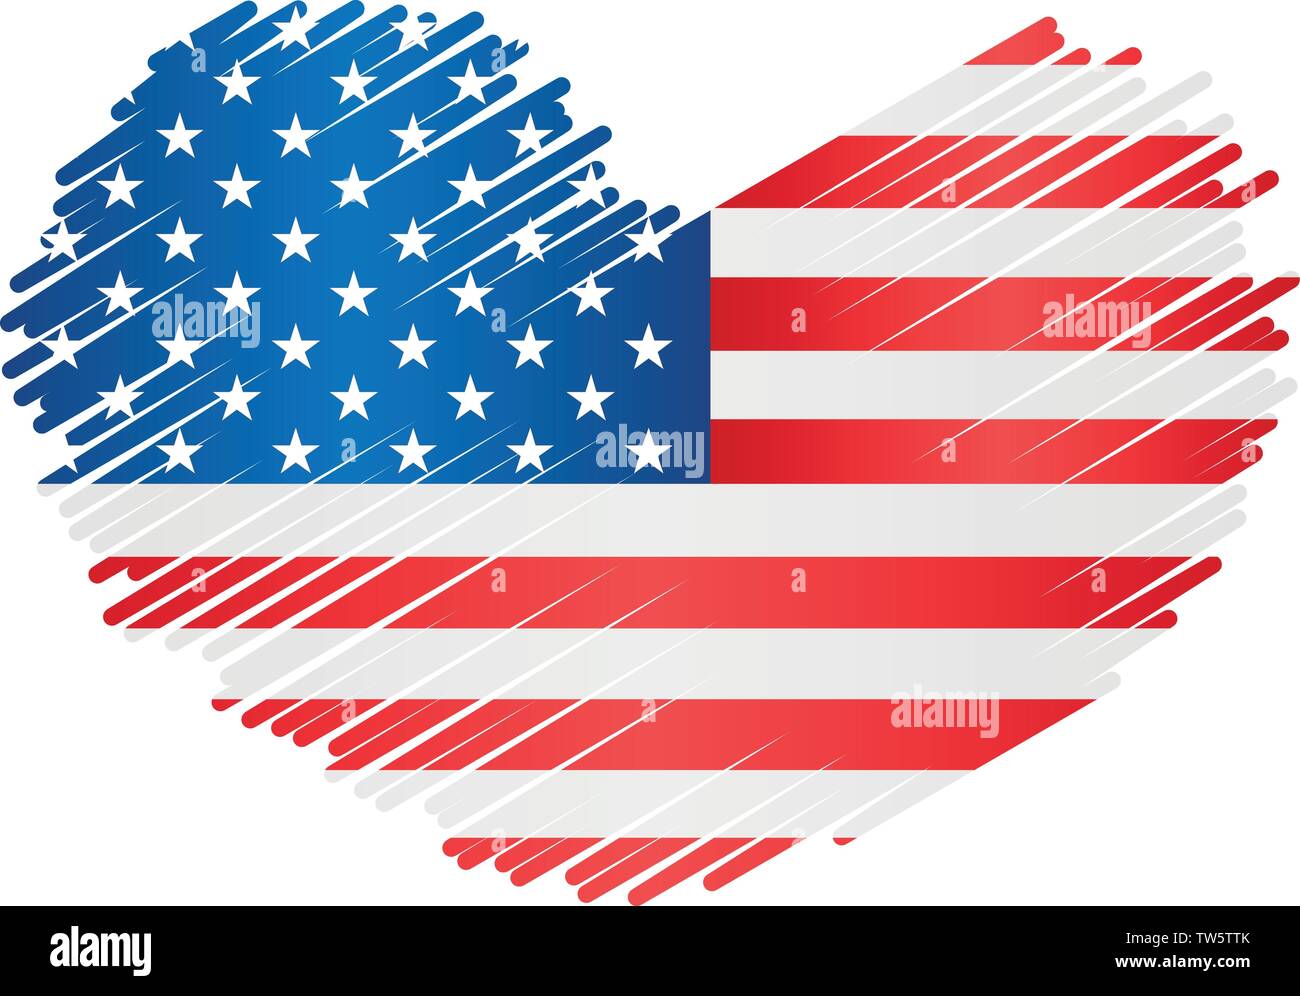 american flag of united states of america heart vector Stock Vector